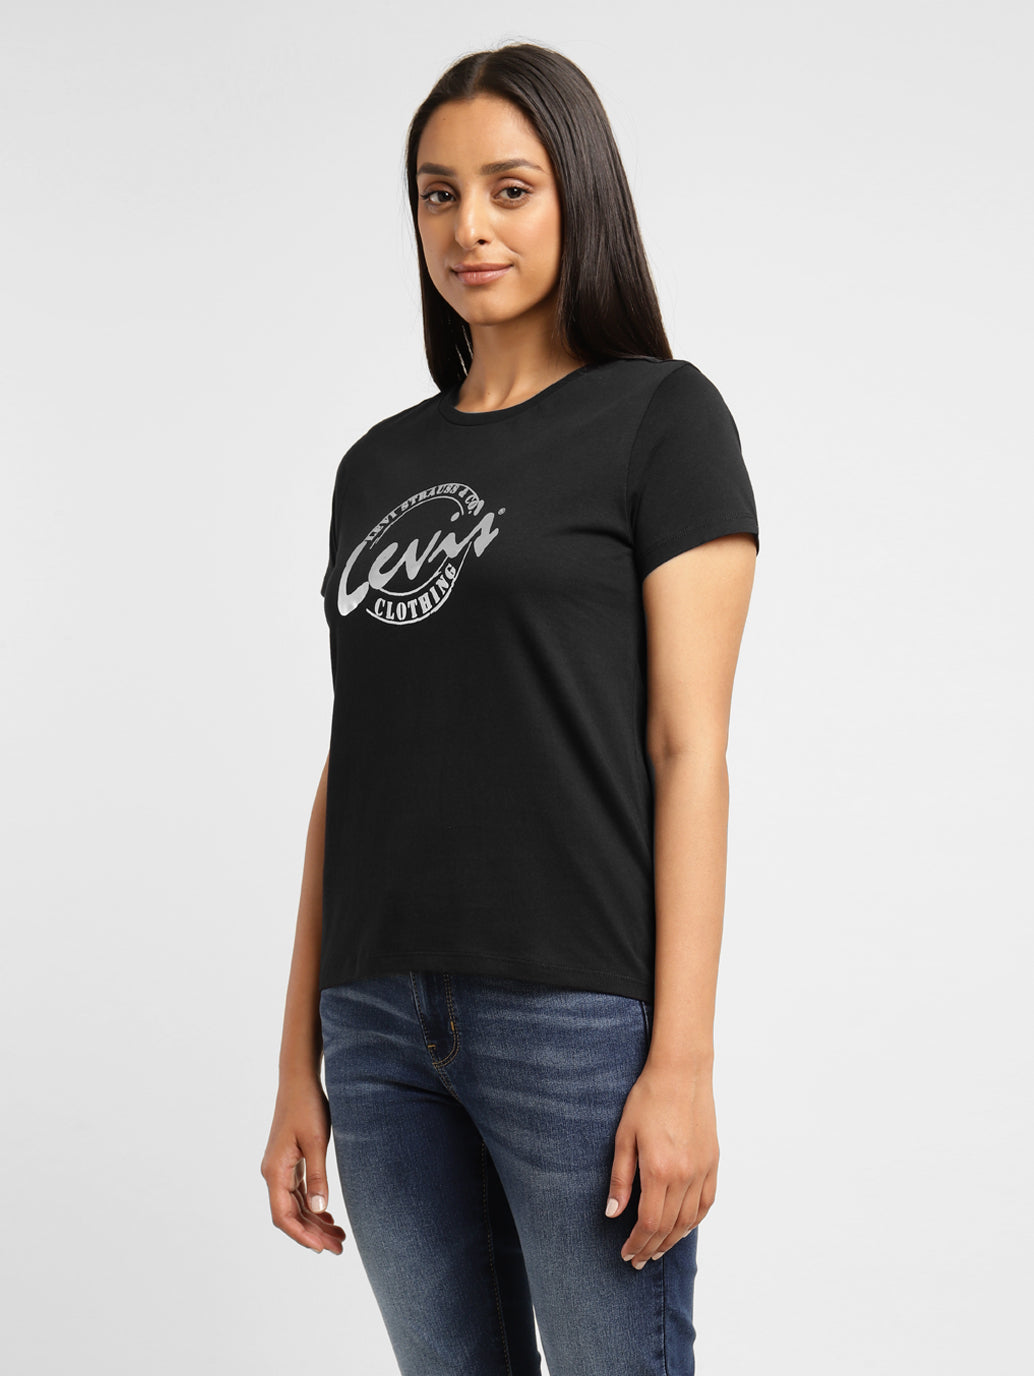 Calvin Klein Jeans Woven Label Rib V-neck Tee - T-shirts & Tops 